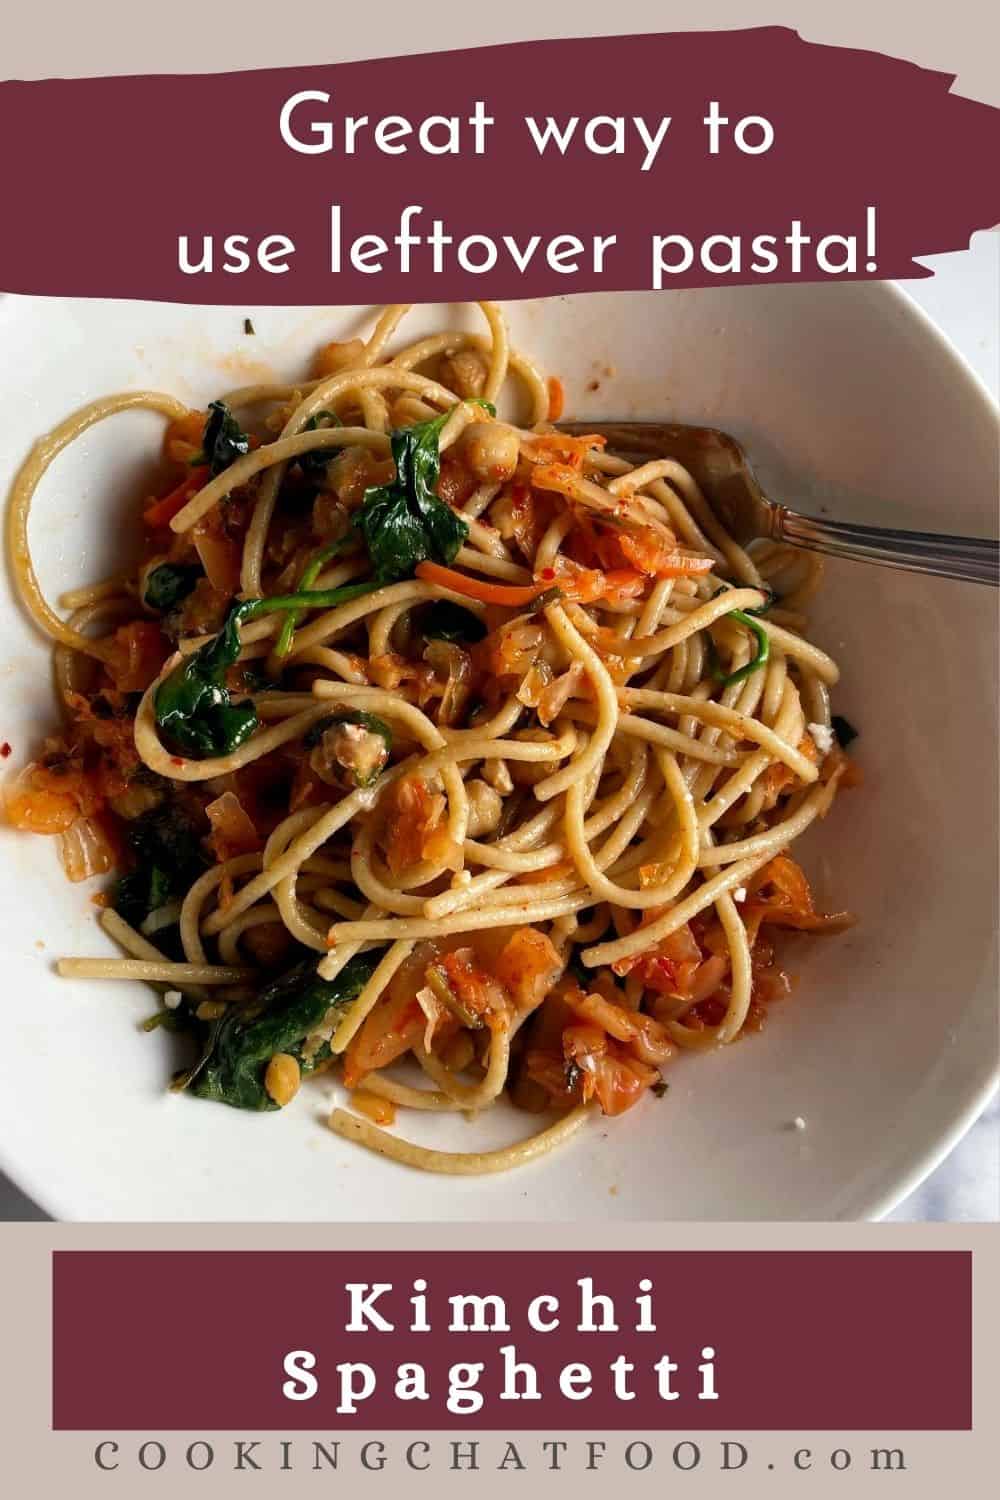 Looking for a delicious way to use leftover spaghetti? Try this super easy kimchi spaghetti recipe - healthy and full of flavor!